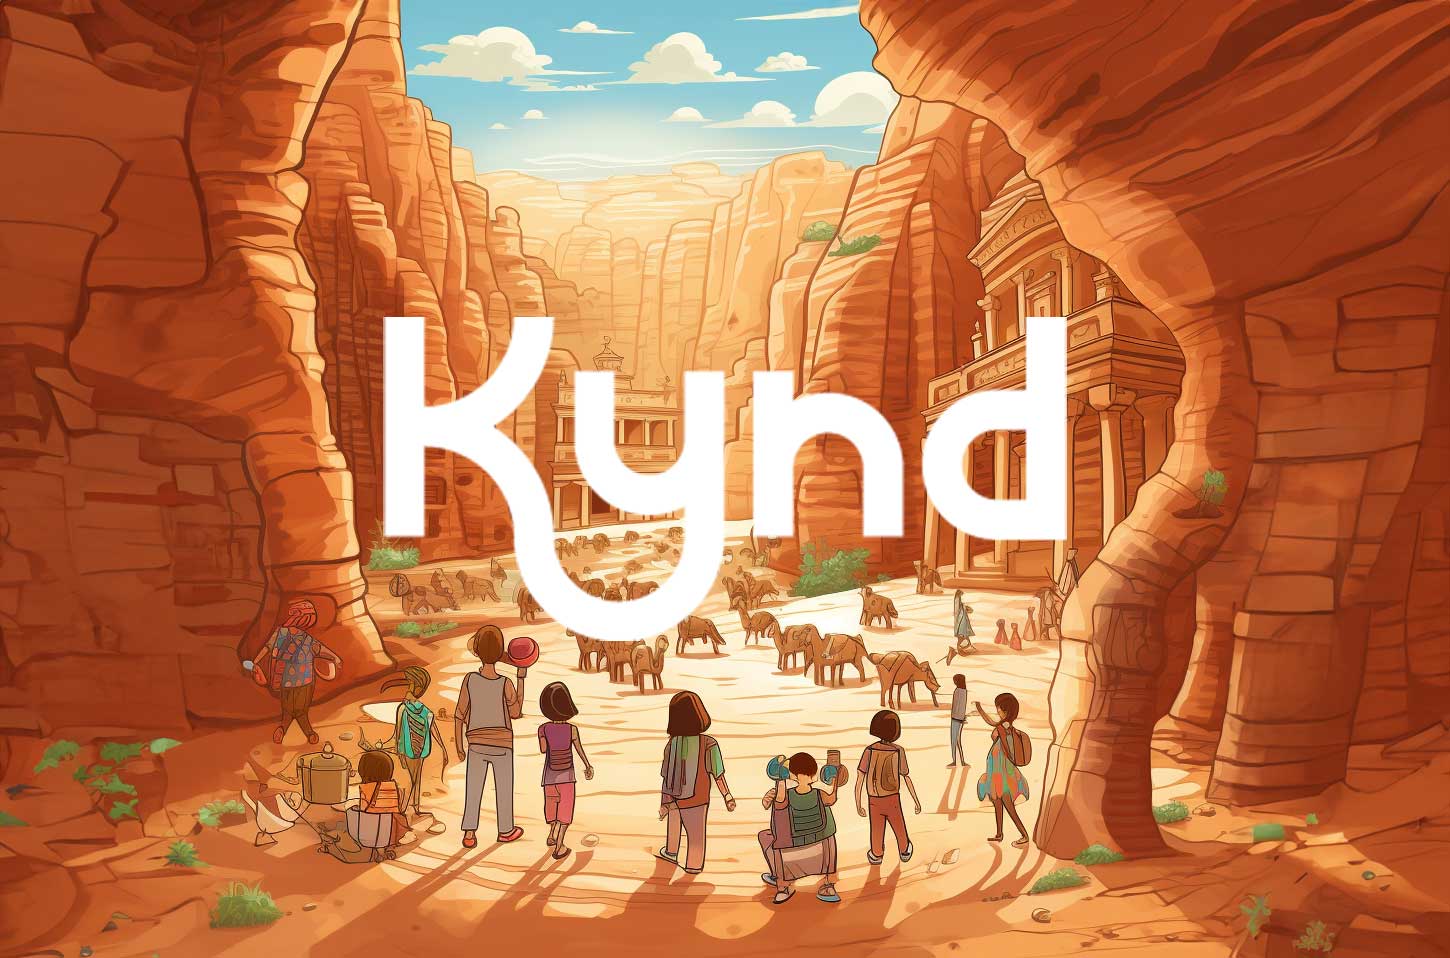 A captivating view of Petra, Jordan, with the charming 'Kynd' marketing agency logo in a delightful cartoon style